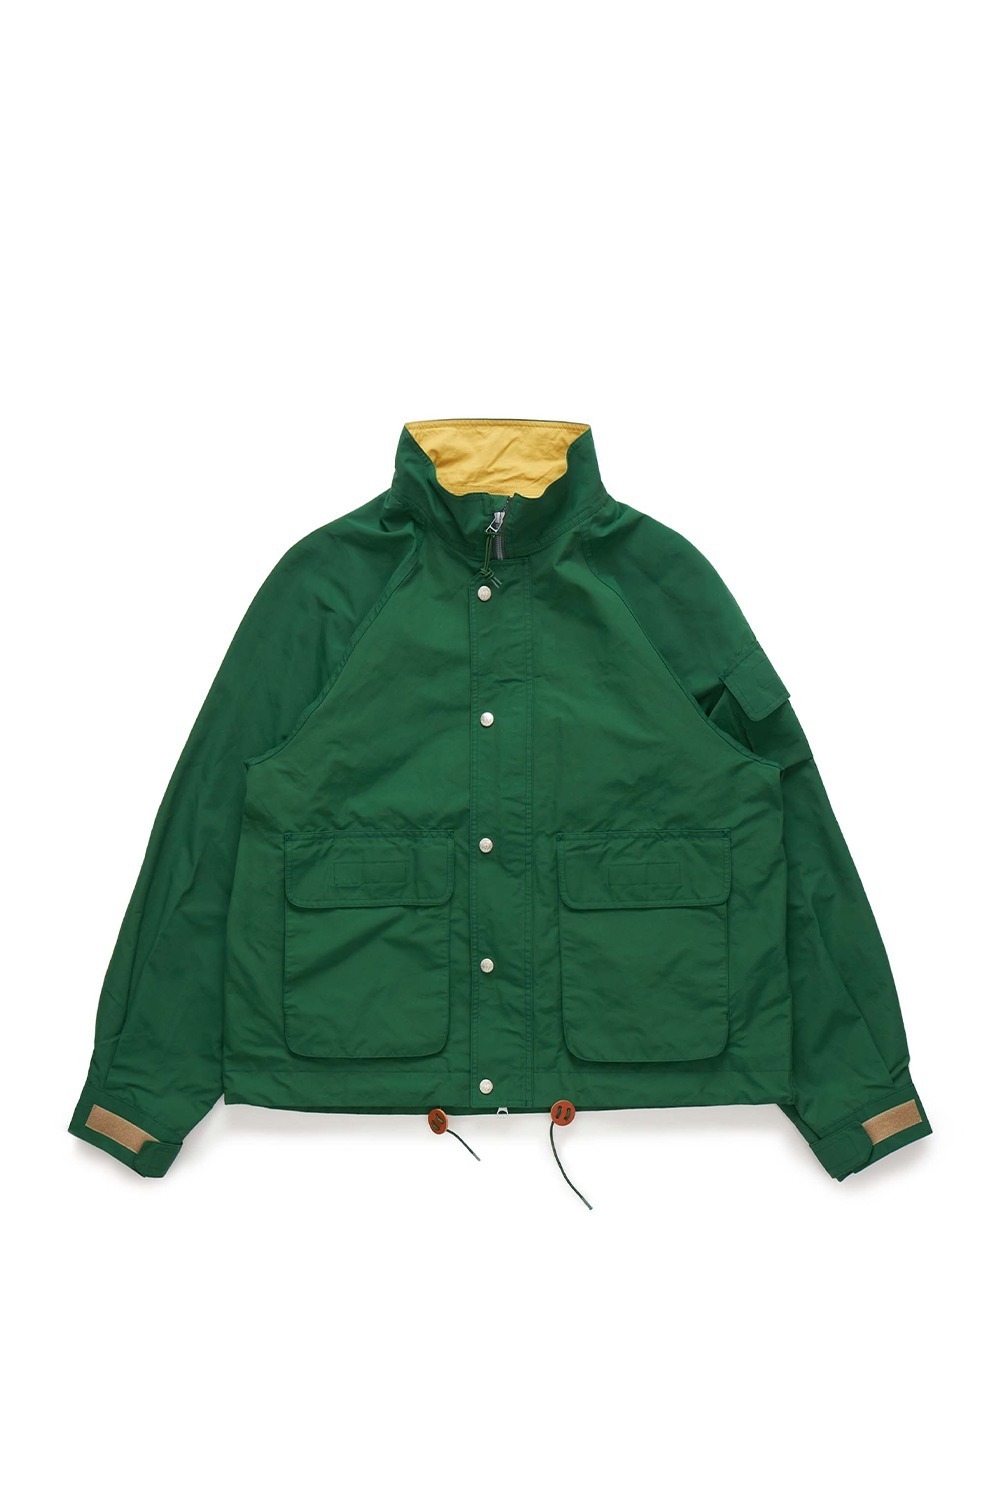 [EASTLOGUE X BROOKS BROTHERS] MOUNTAIN SHORT JACKET / GREEN